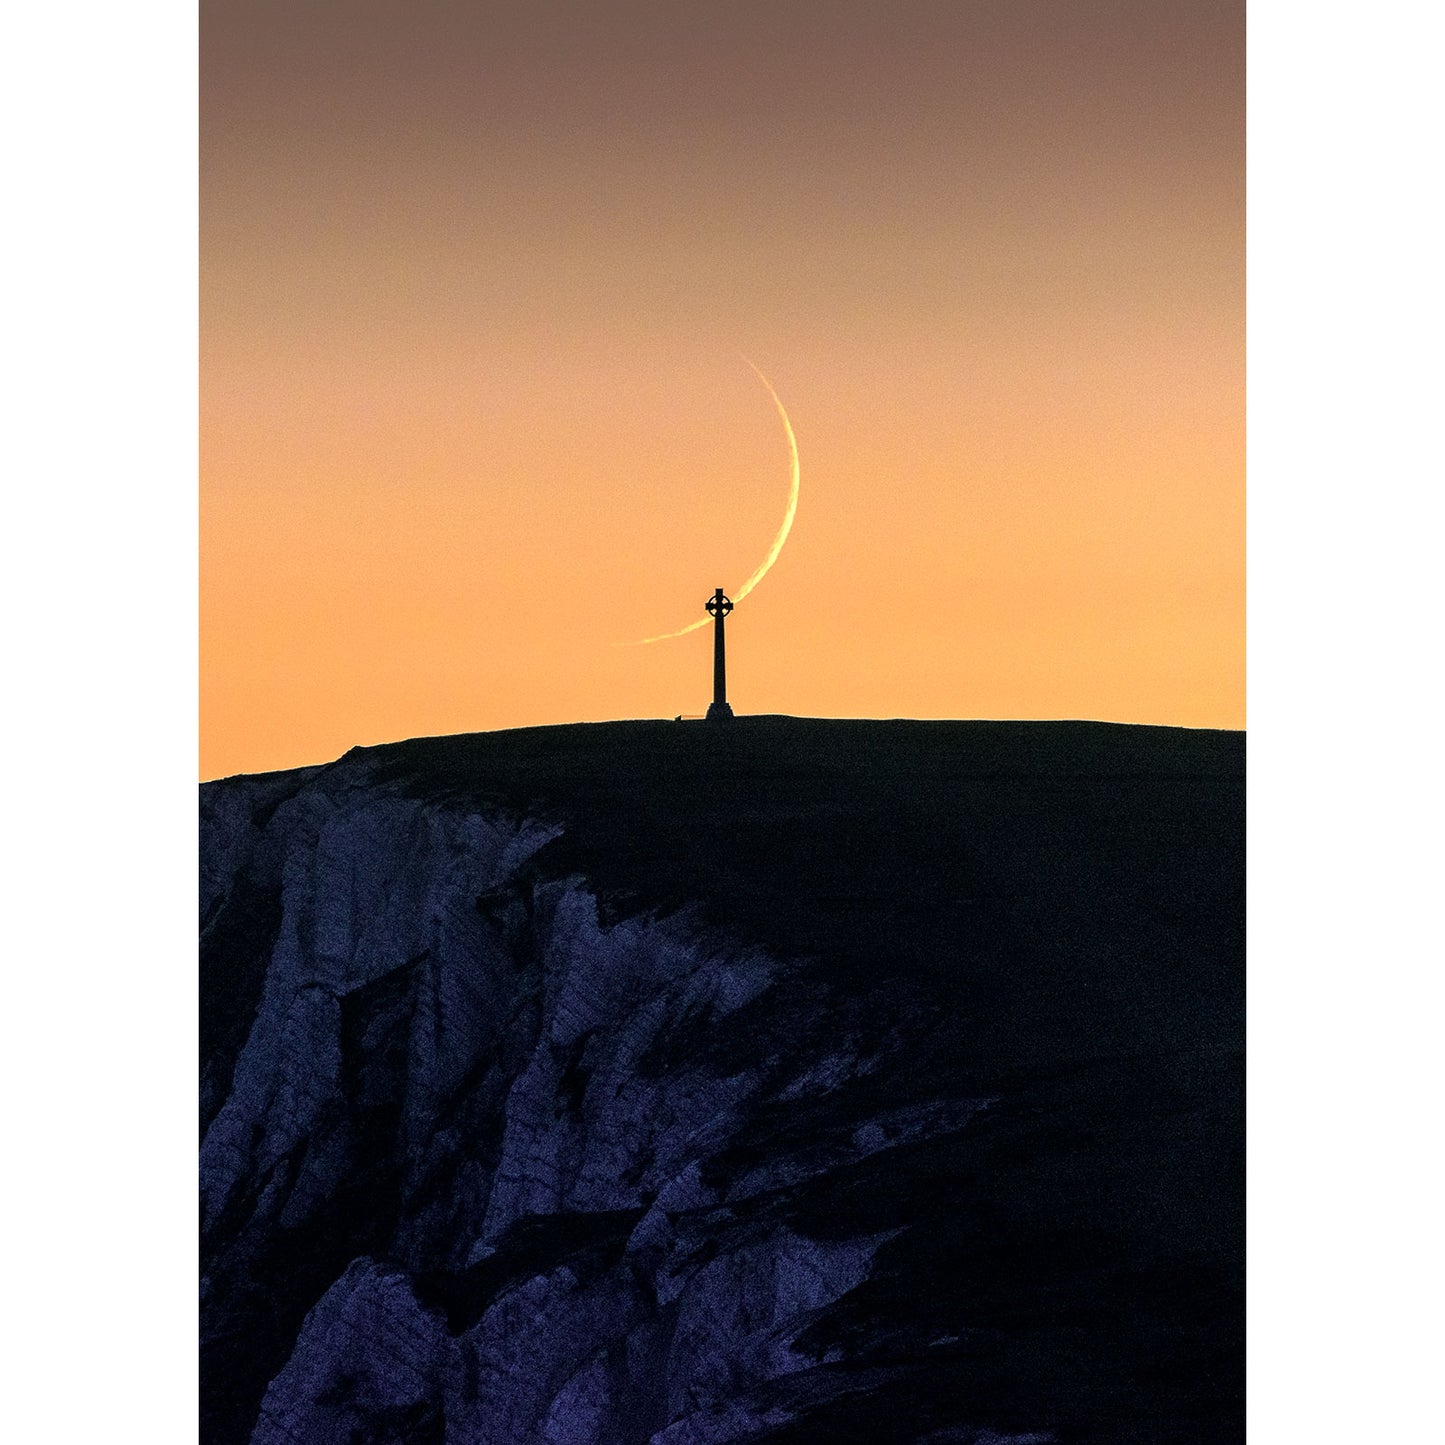 A person stands on a hilltop against a twilight sky with a Crescent Moon above, overlooking Tennyson Down on the Isle of Wight captured by Available Light Photography.